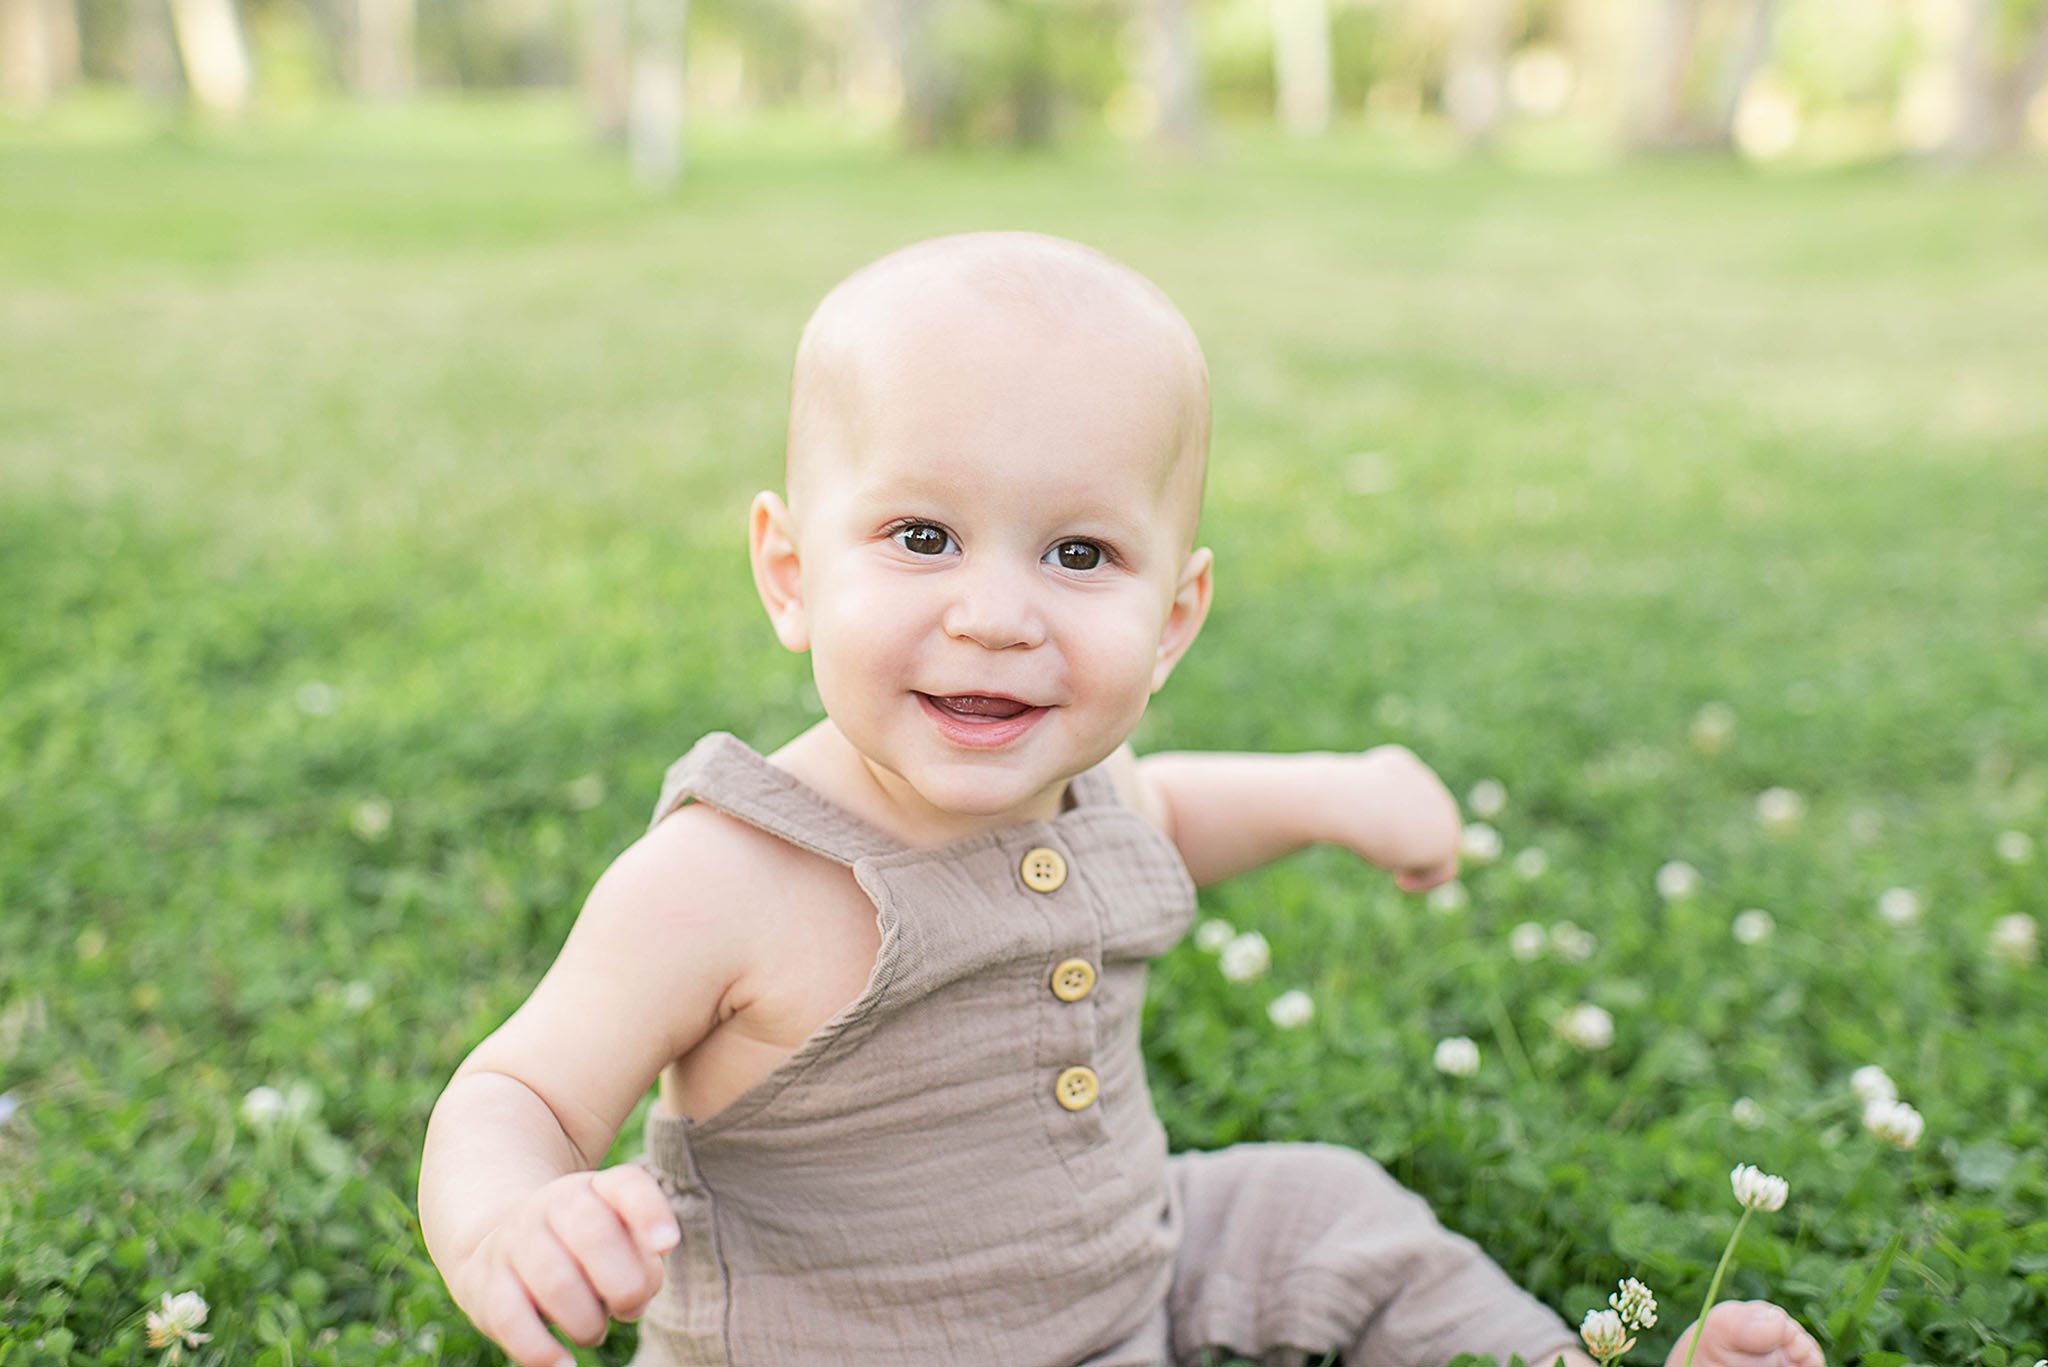 A happy toddler boy in a brown onesie sits in a field of clover smiling after visiting a jacksonville pediatric dentist